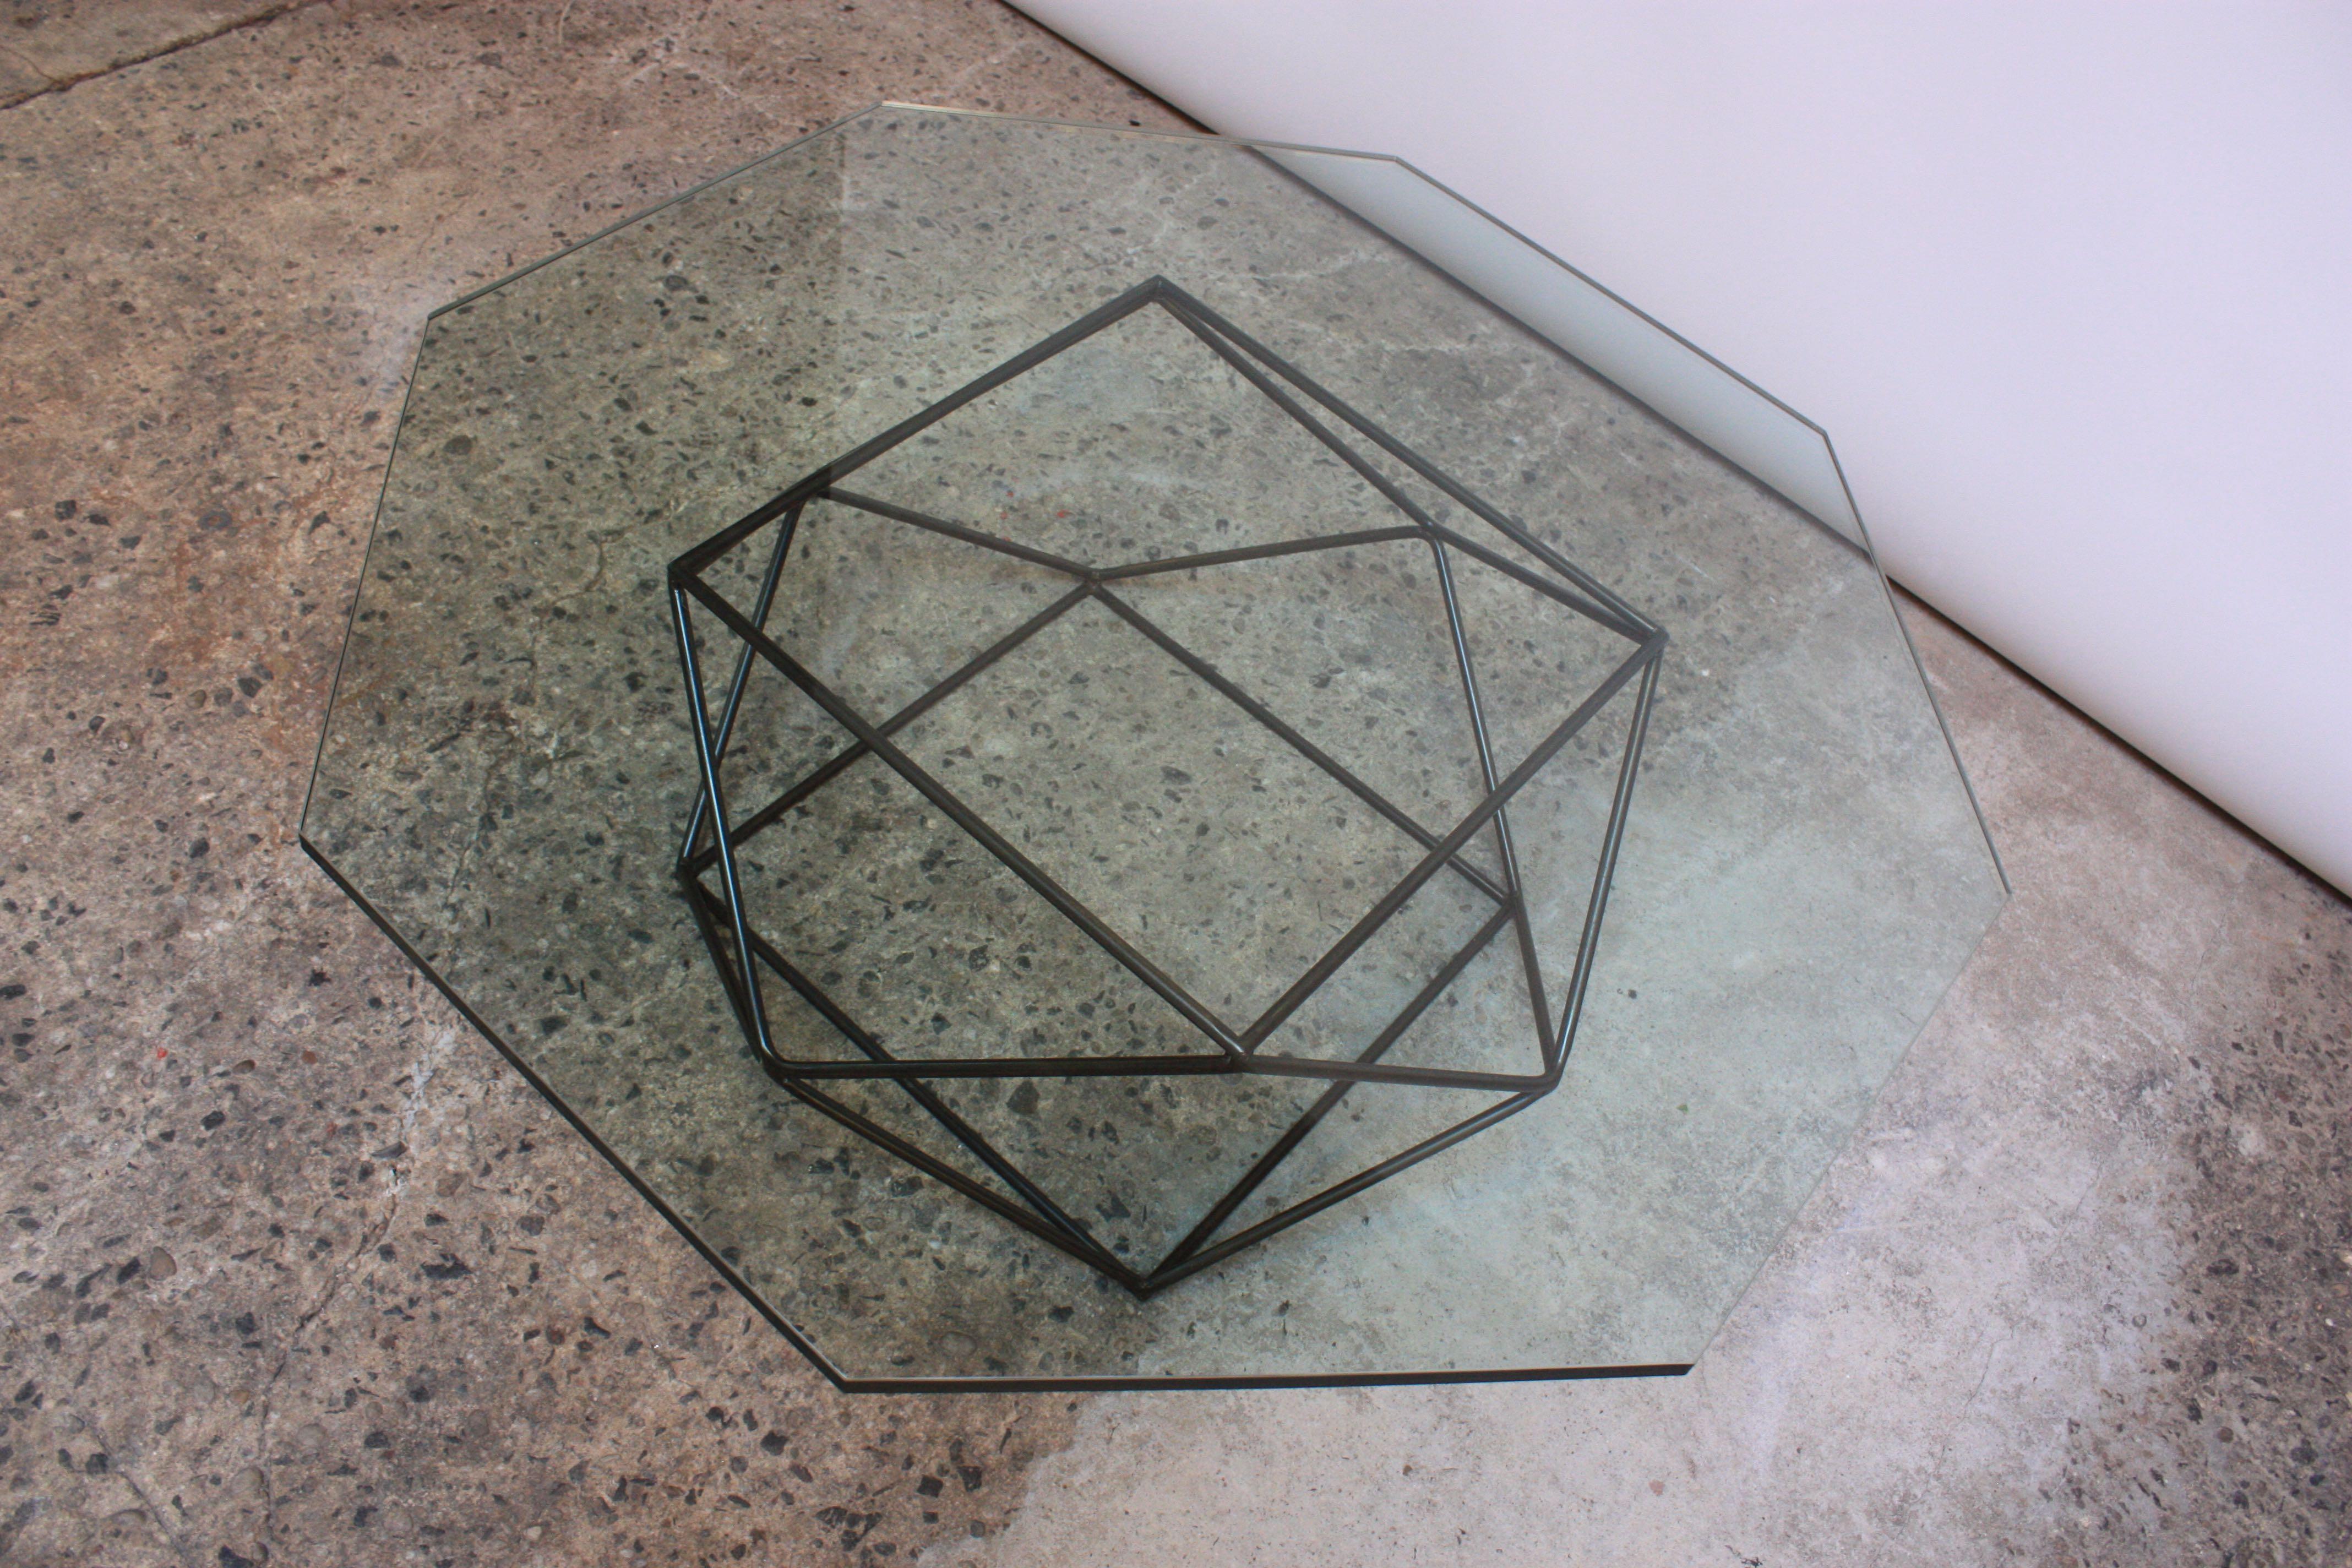 Early 1970s geometric coffee table by Milo Baughman for Directional. Bronze-finished base with original, octagonal glass top, rare in its complete presentation. Dense, glass is 3/4